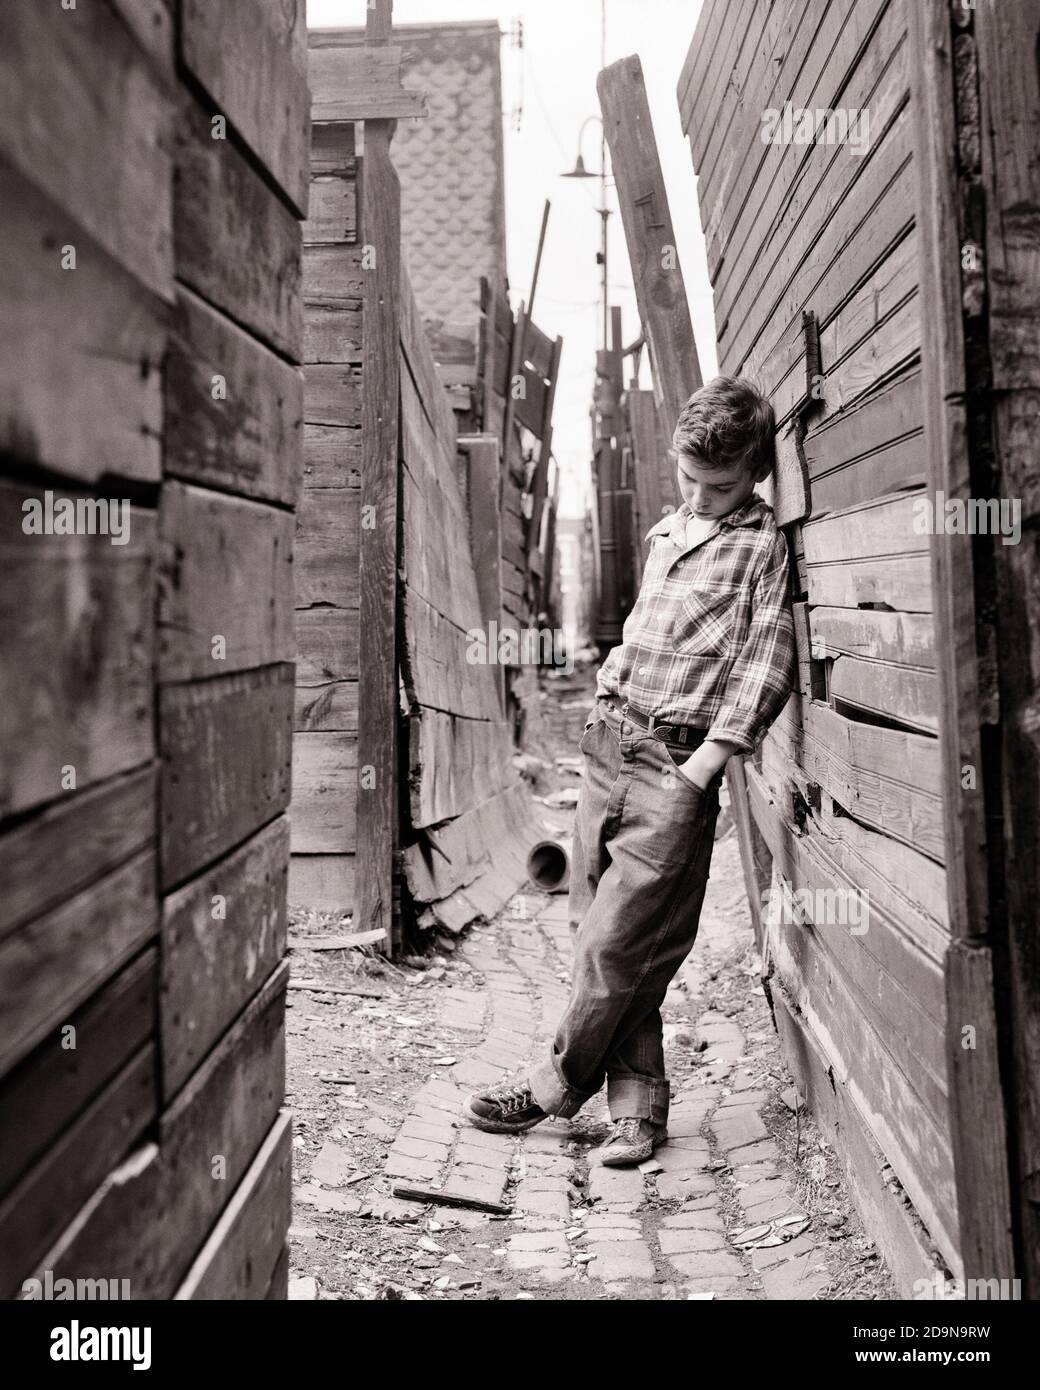 1950s TRUANCY SAD LONELY PRE-TEEN BOY IN POVERTY STRICKEN NEIGHBORHOOD ALLEY LEANING UP AGAINST A WOODEN FENCE PLAYING HOOKY - w1785 HAR001 HARS POOR HOME LIFE COPY SPACE AGAINST FULL-LENGTH MALES RISK DENIM TROUBLED B&W CONCERNED SADNESS DREAMS NEIGHBORHOOD PRIDE UP MOOD GLUM DISADVANTAGED JOYLESS BLUE JEANS DISAFFECTED DISAPPOINTED DISCONNECTED IMPOVERISHED JUVENILES MISERABLE PRE-TEEN PRE-TEEN BOY SLUM STRICKEN BLACK AND WHITE CAUCASIAN ETHNICITY DISTRAUGHT HAR001 NEEDY OLD FASHIONED Stock Photo